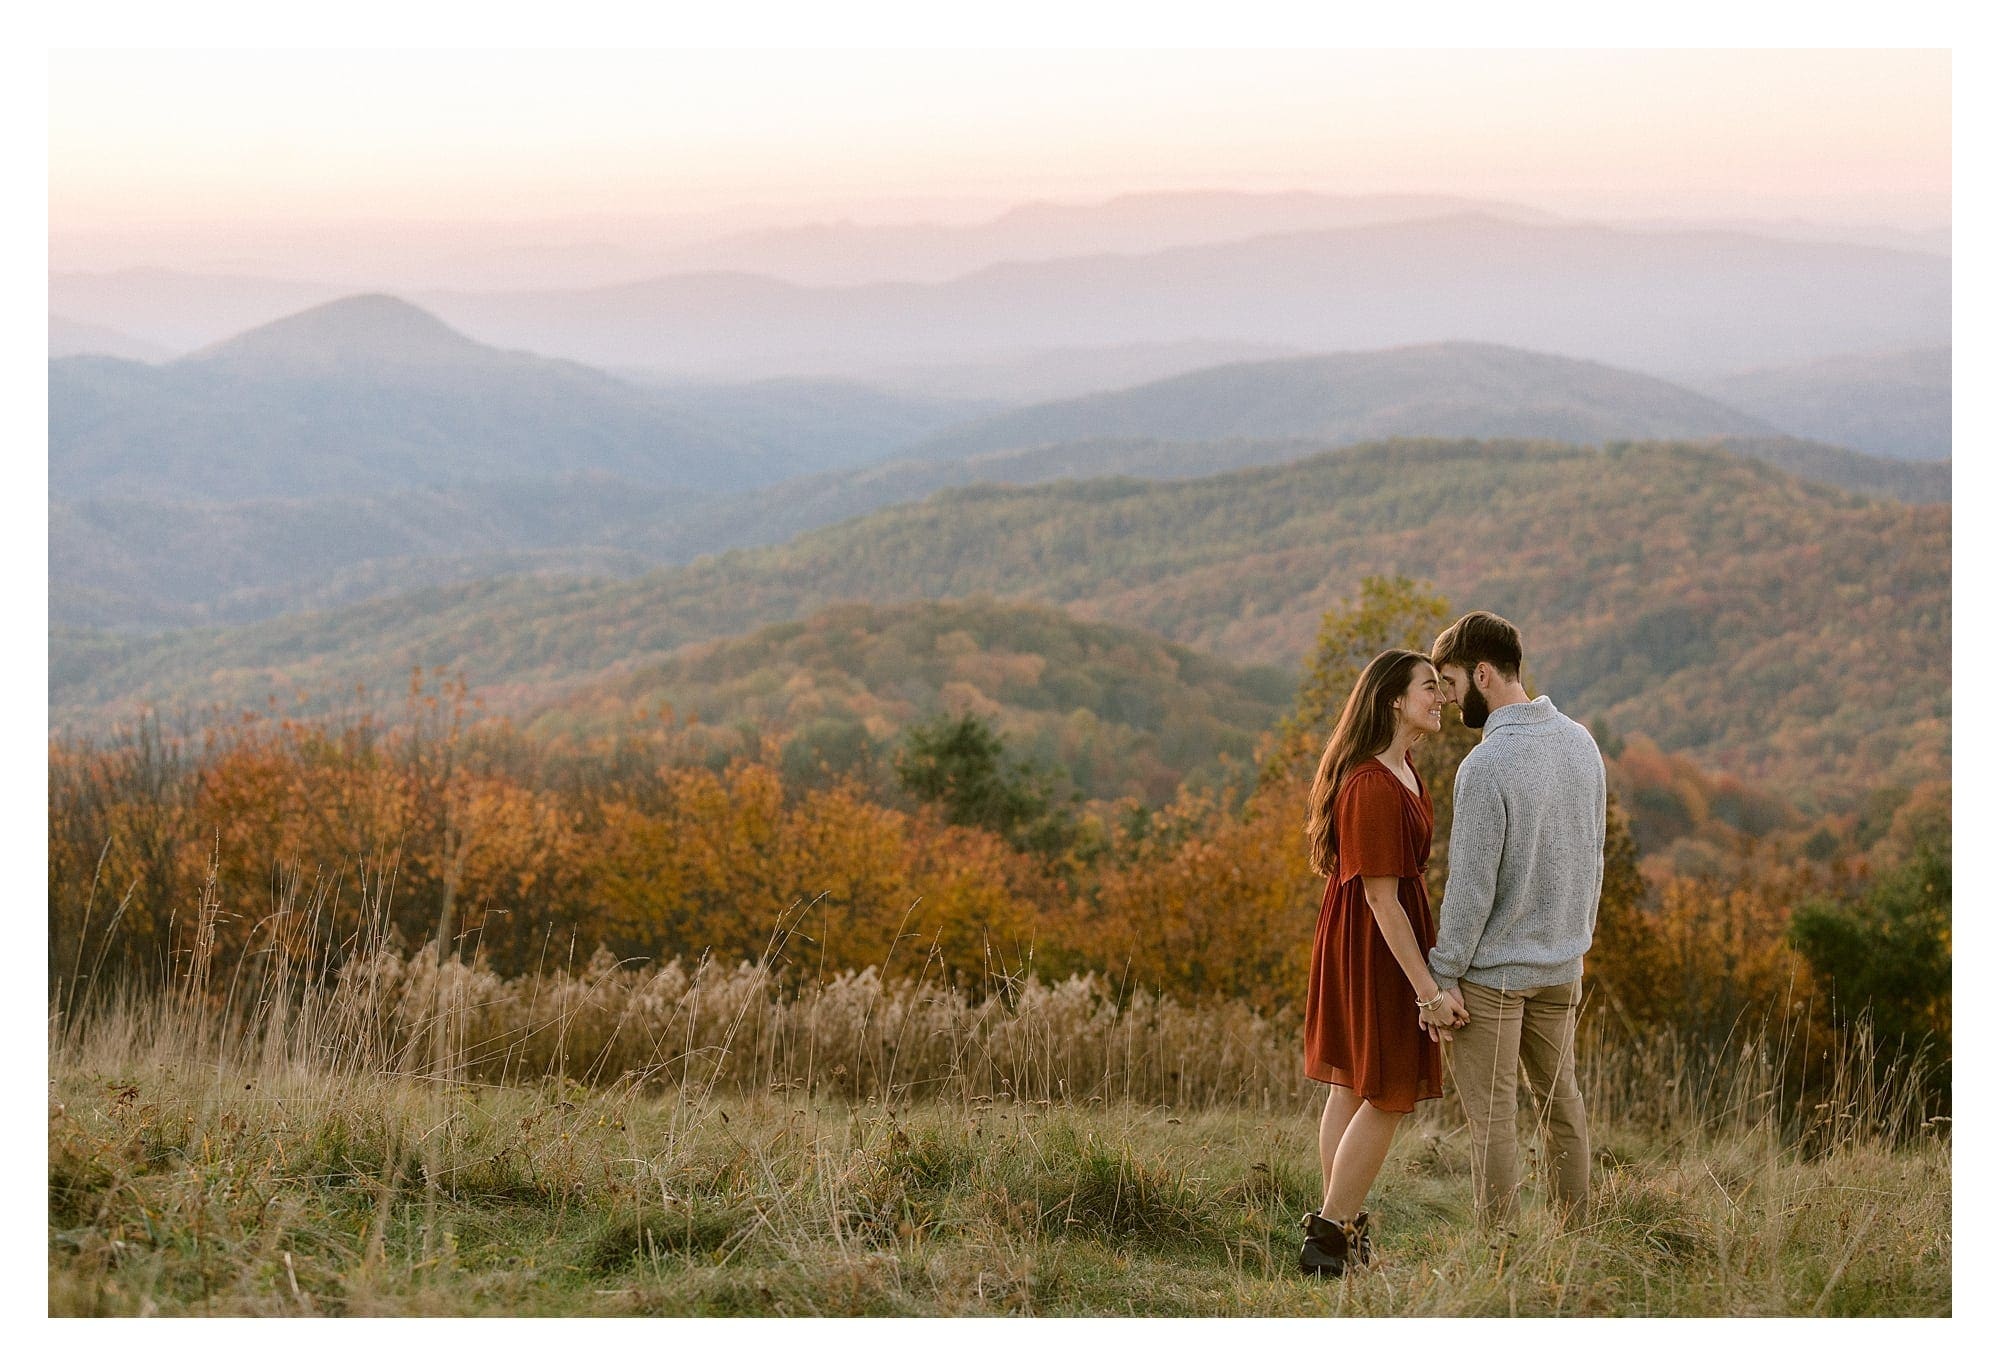 Young engaged couple kissing in golden grassy autumn field at sunset over looking mountain range